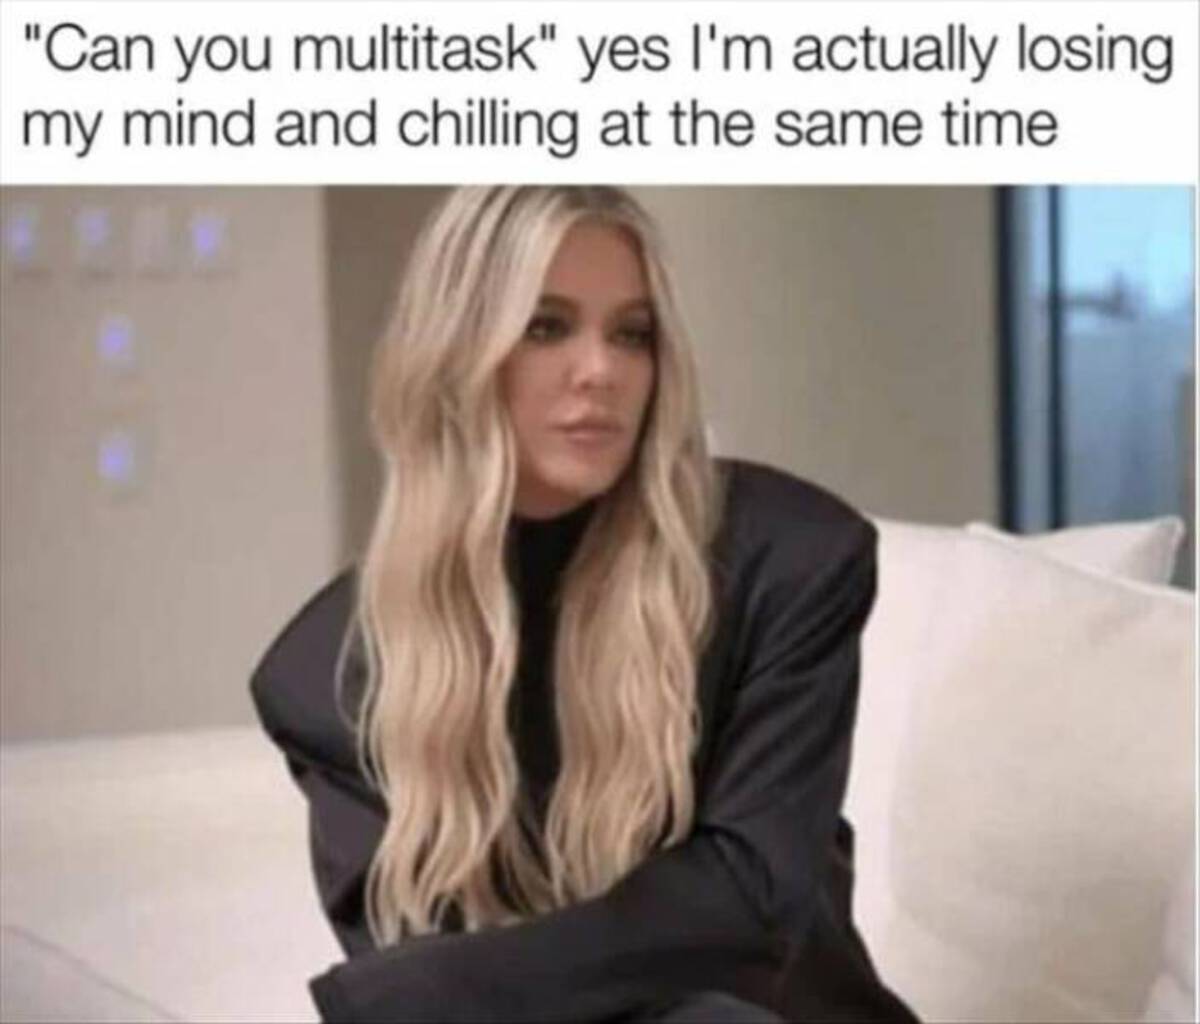 khloe kardashian kuwtk - "Can you multitask" yes I'm actually losing my mind and chilling at the same time